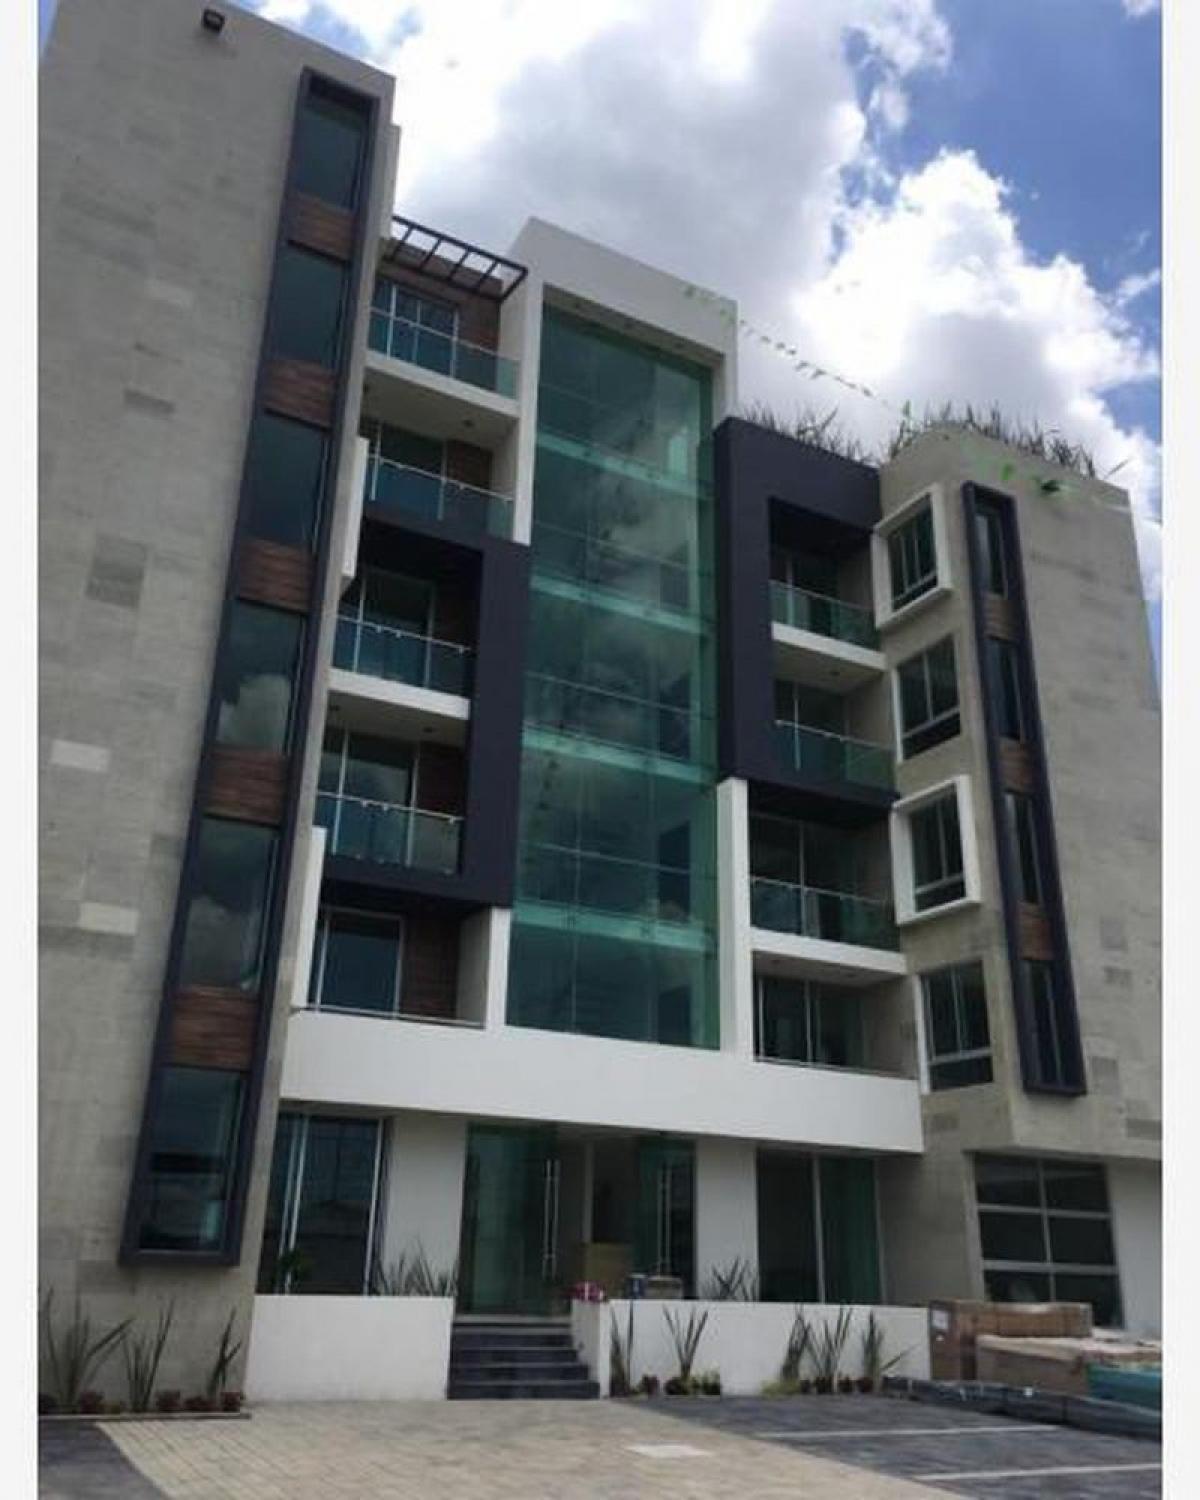 Picture of Apartment For Sale in San Pedro Cholula, Puebla, Mexico